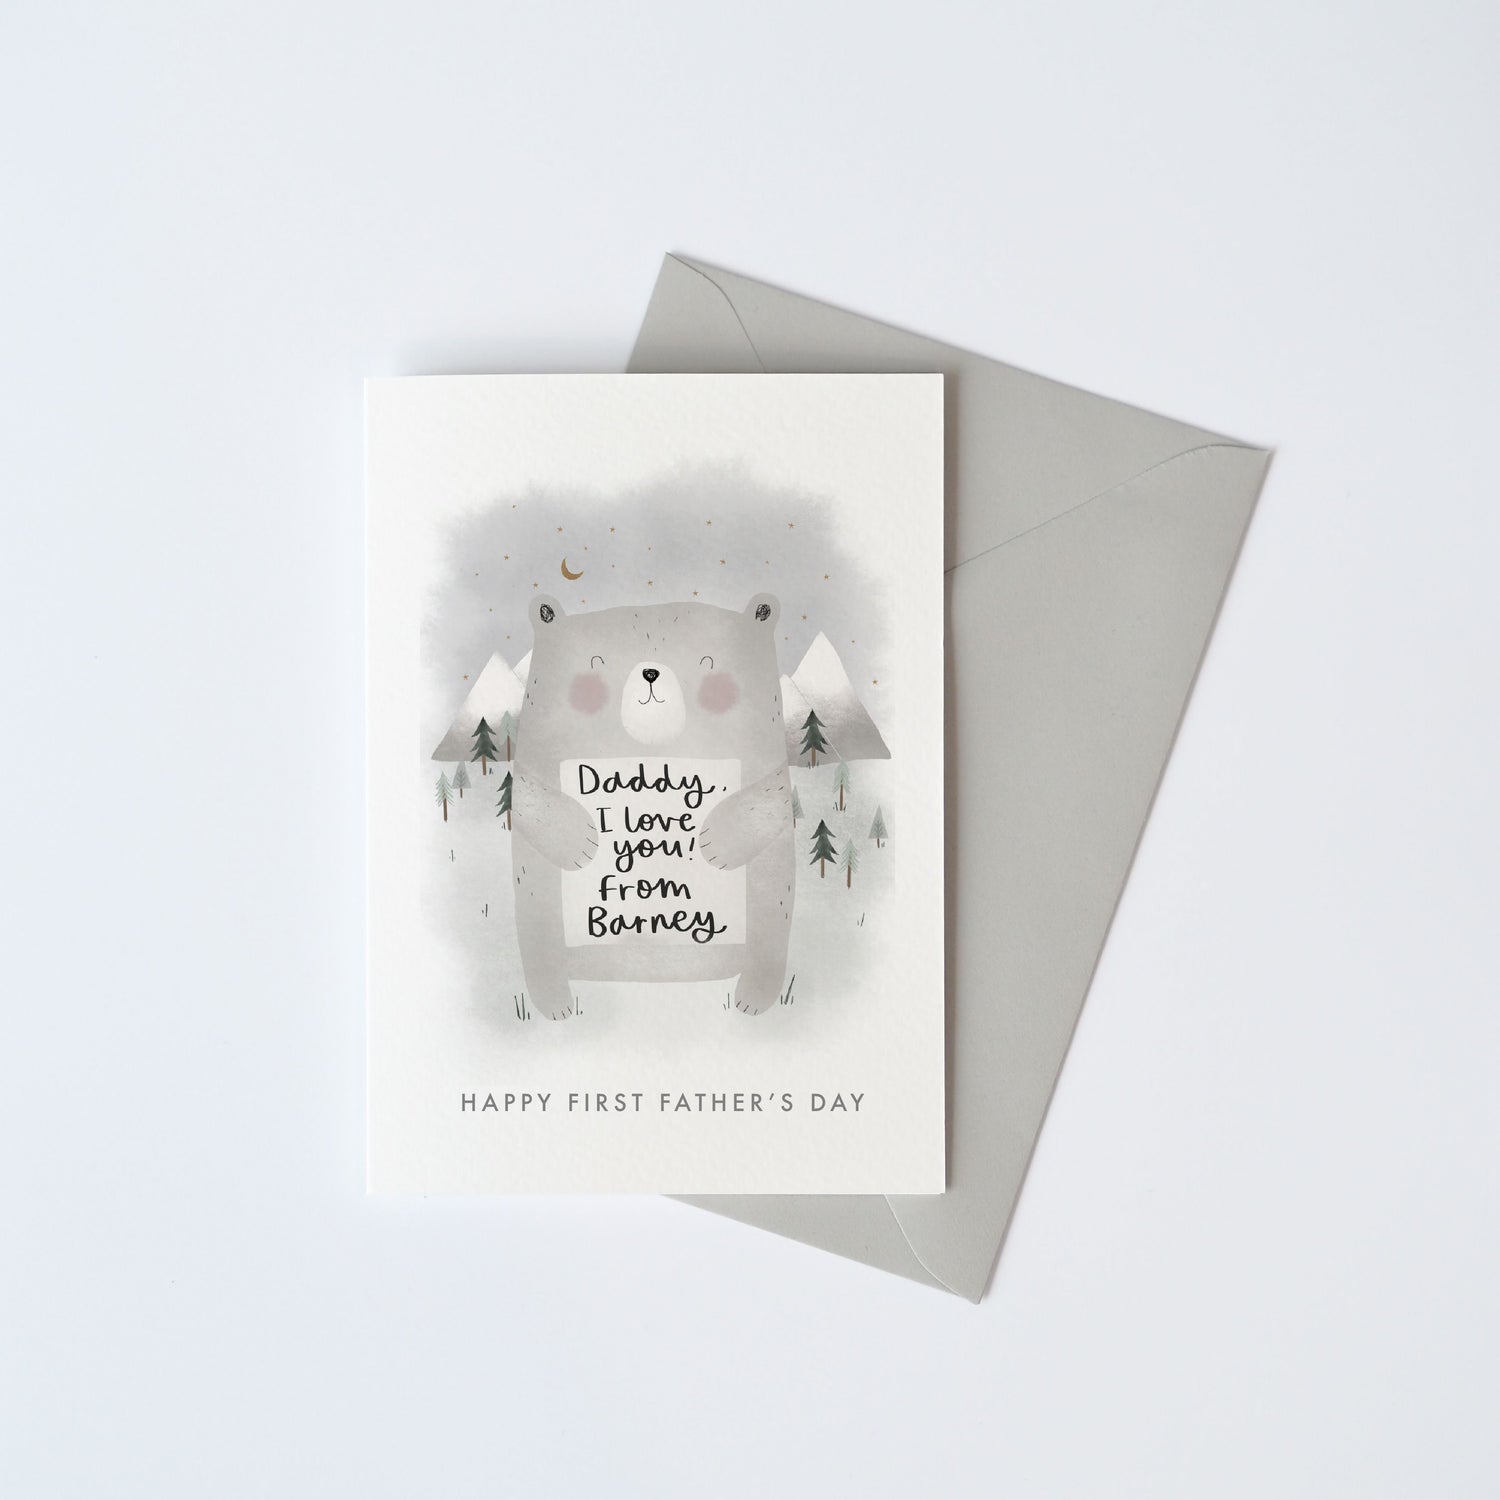 Father’s Day Cards